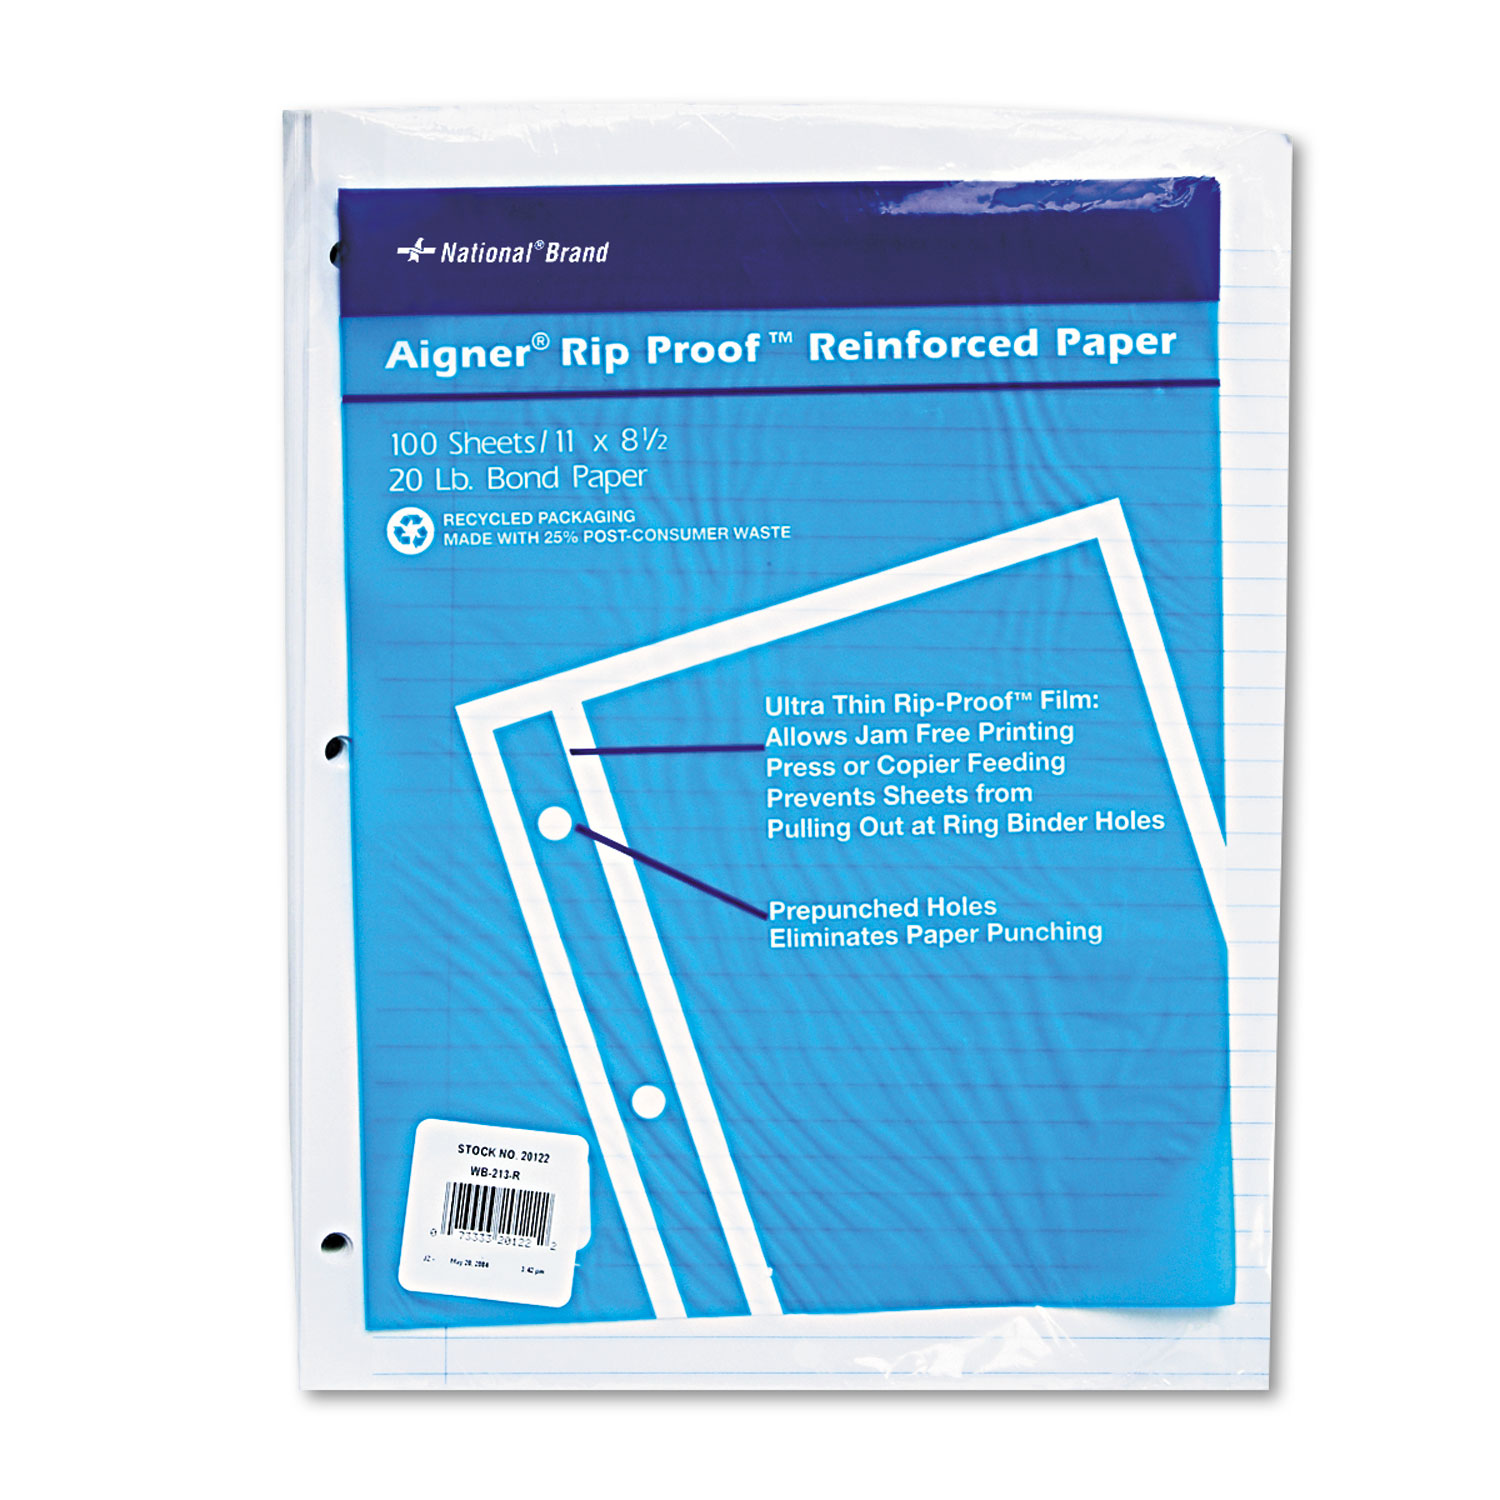 Rip Proof Reinforced Filler Paper, 3-Hole, 8.5 x 11, Narrow Rule, 100/Pack